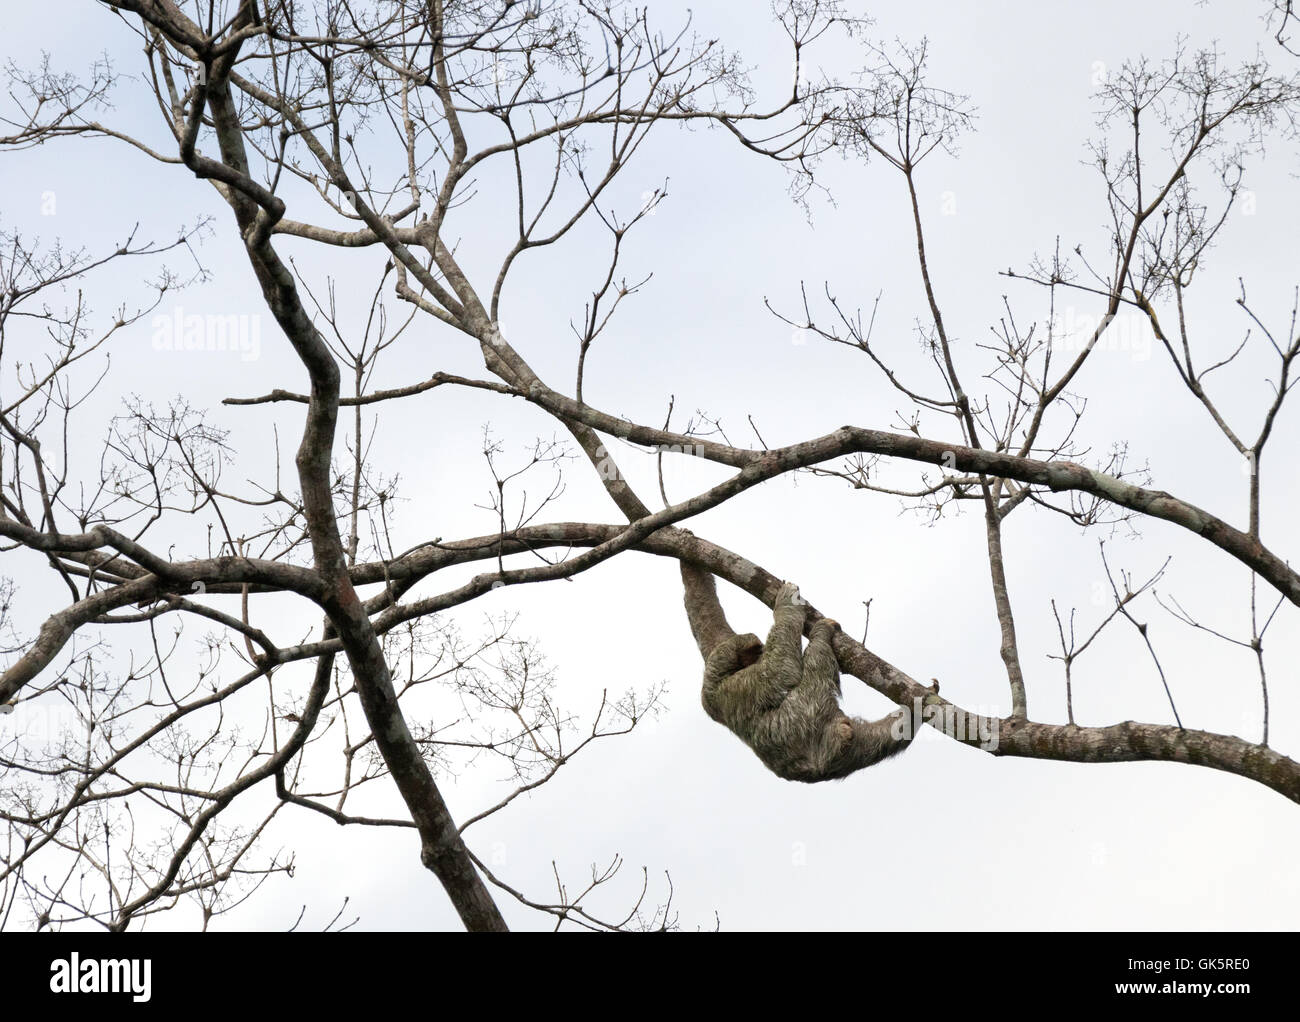 A brown throated three toed sloth  ( Bradypus variegatus ) climbing in a tree, Monteverde, Costa Rica, Central America Stock Photo